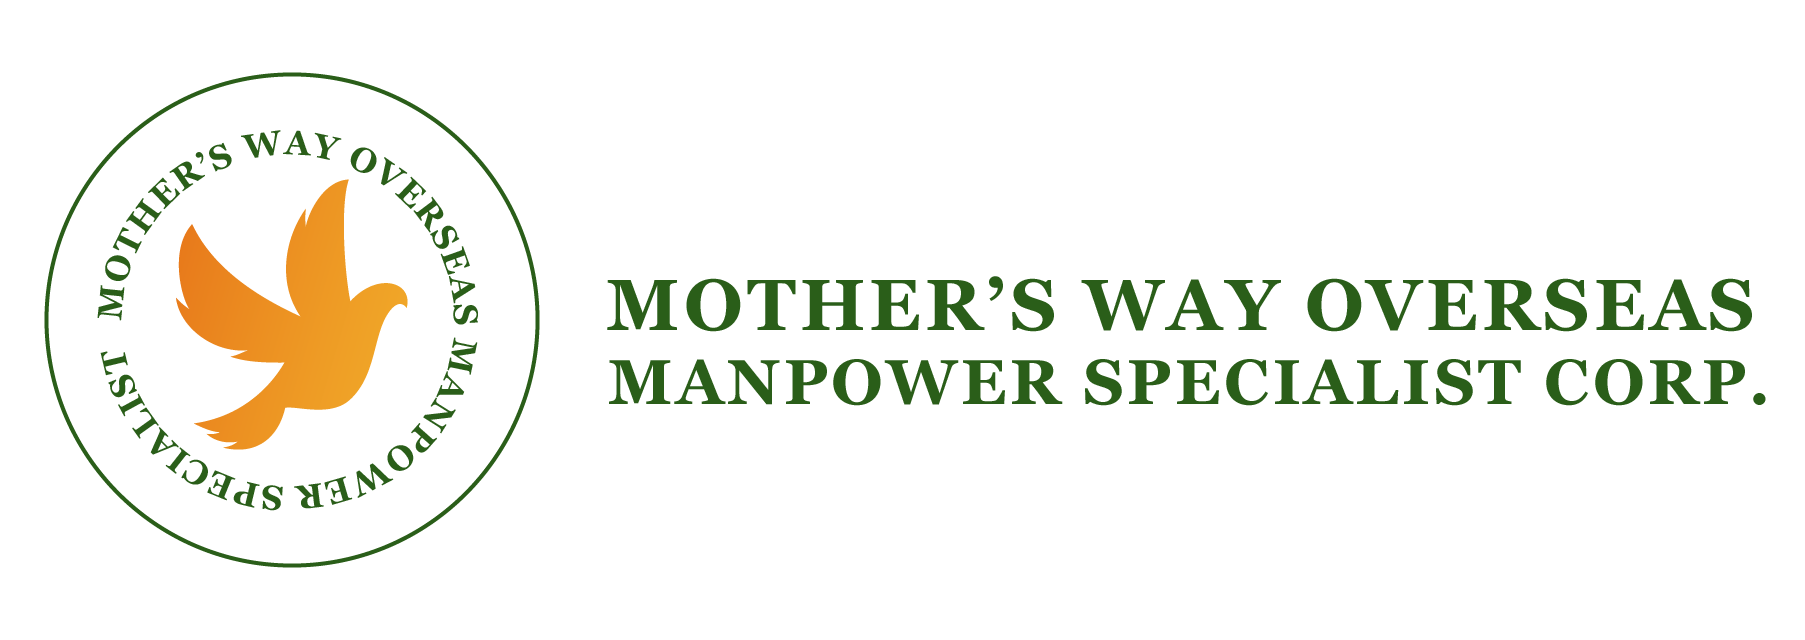 mothersway.org